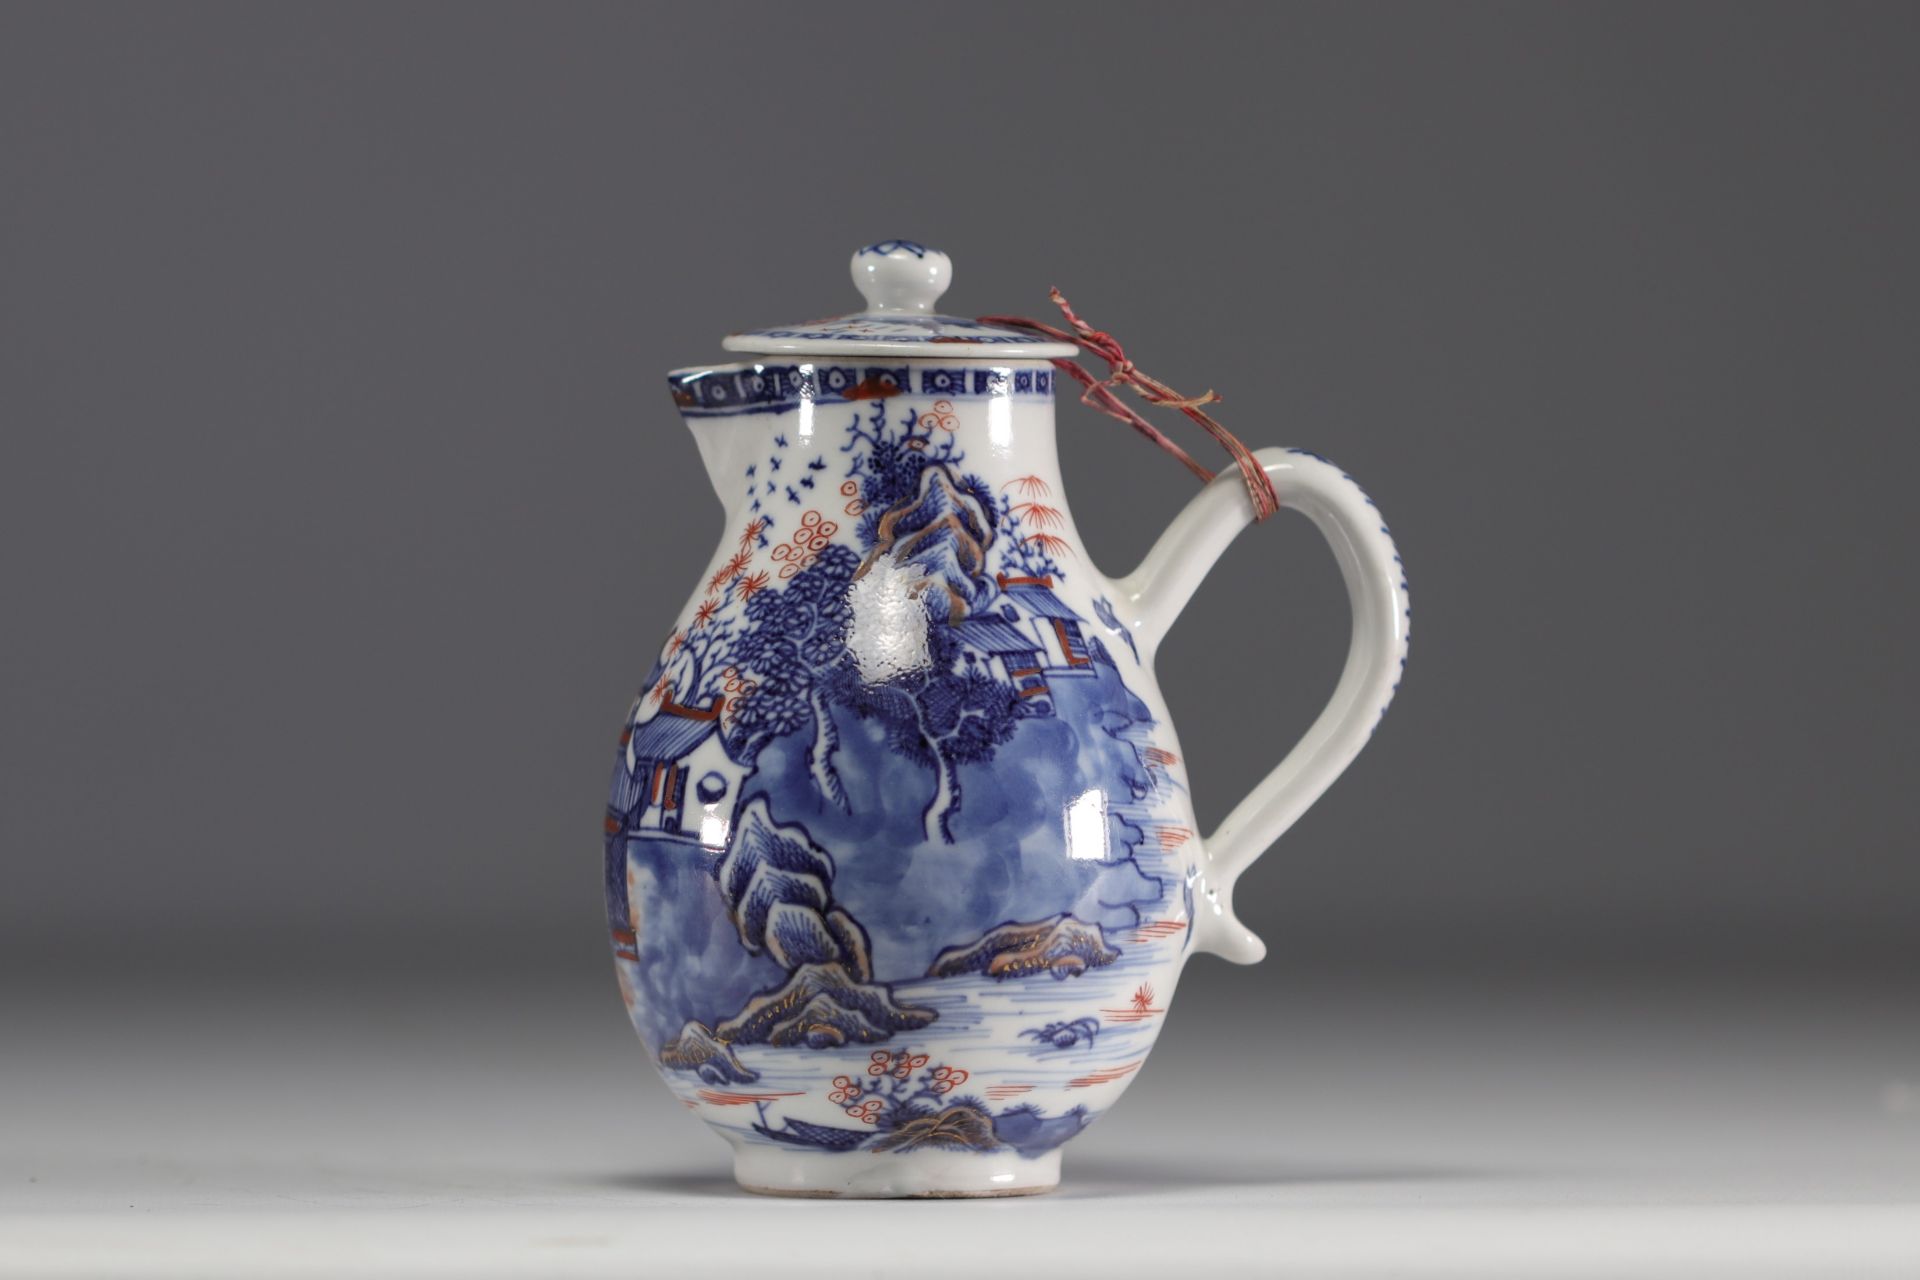 China - white, blue and red porcelain pot decorated with landscapes and figures, Qing period. - Image 4 of 5